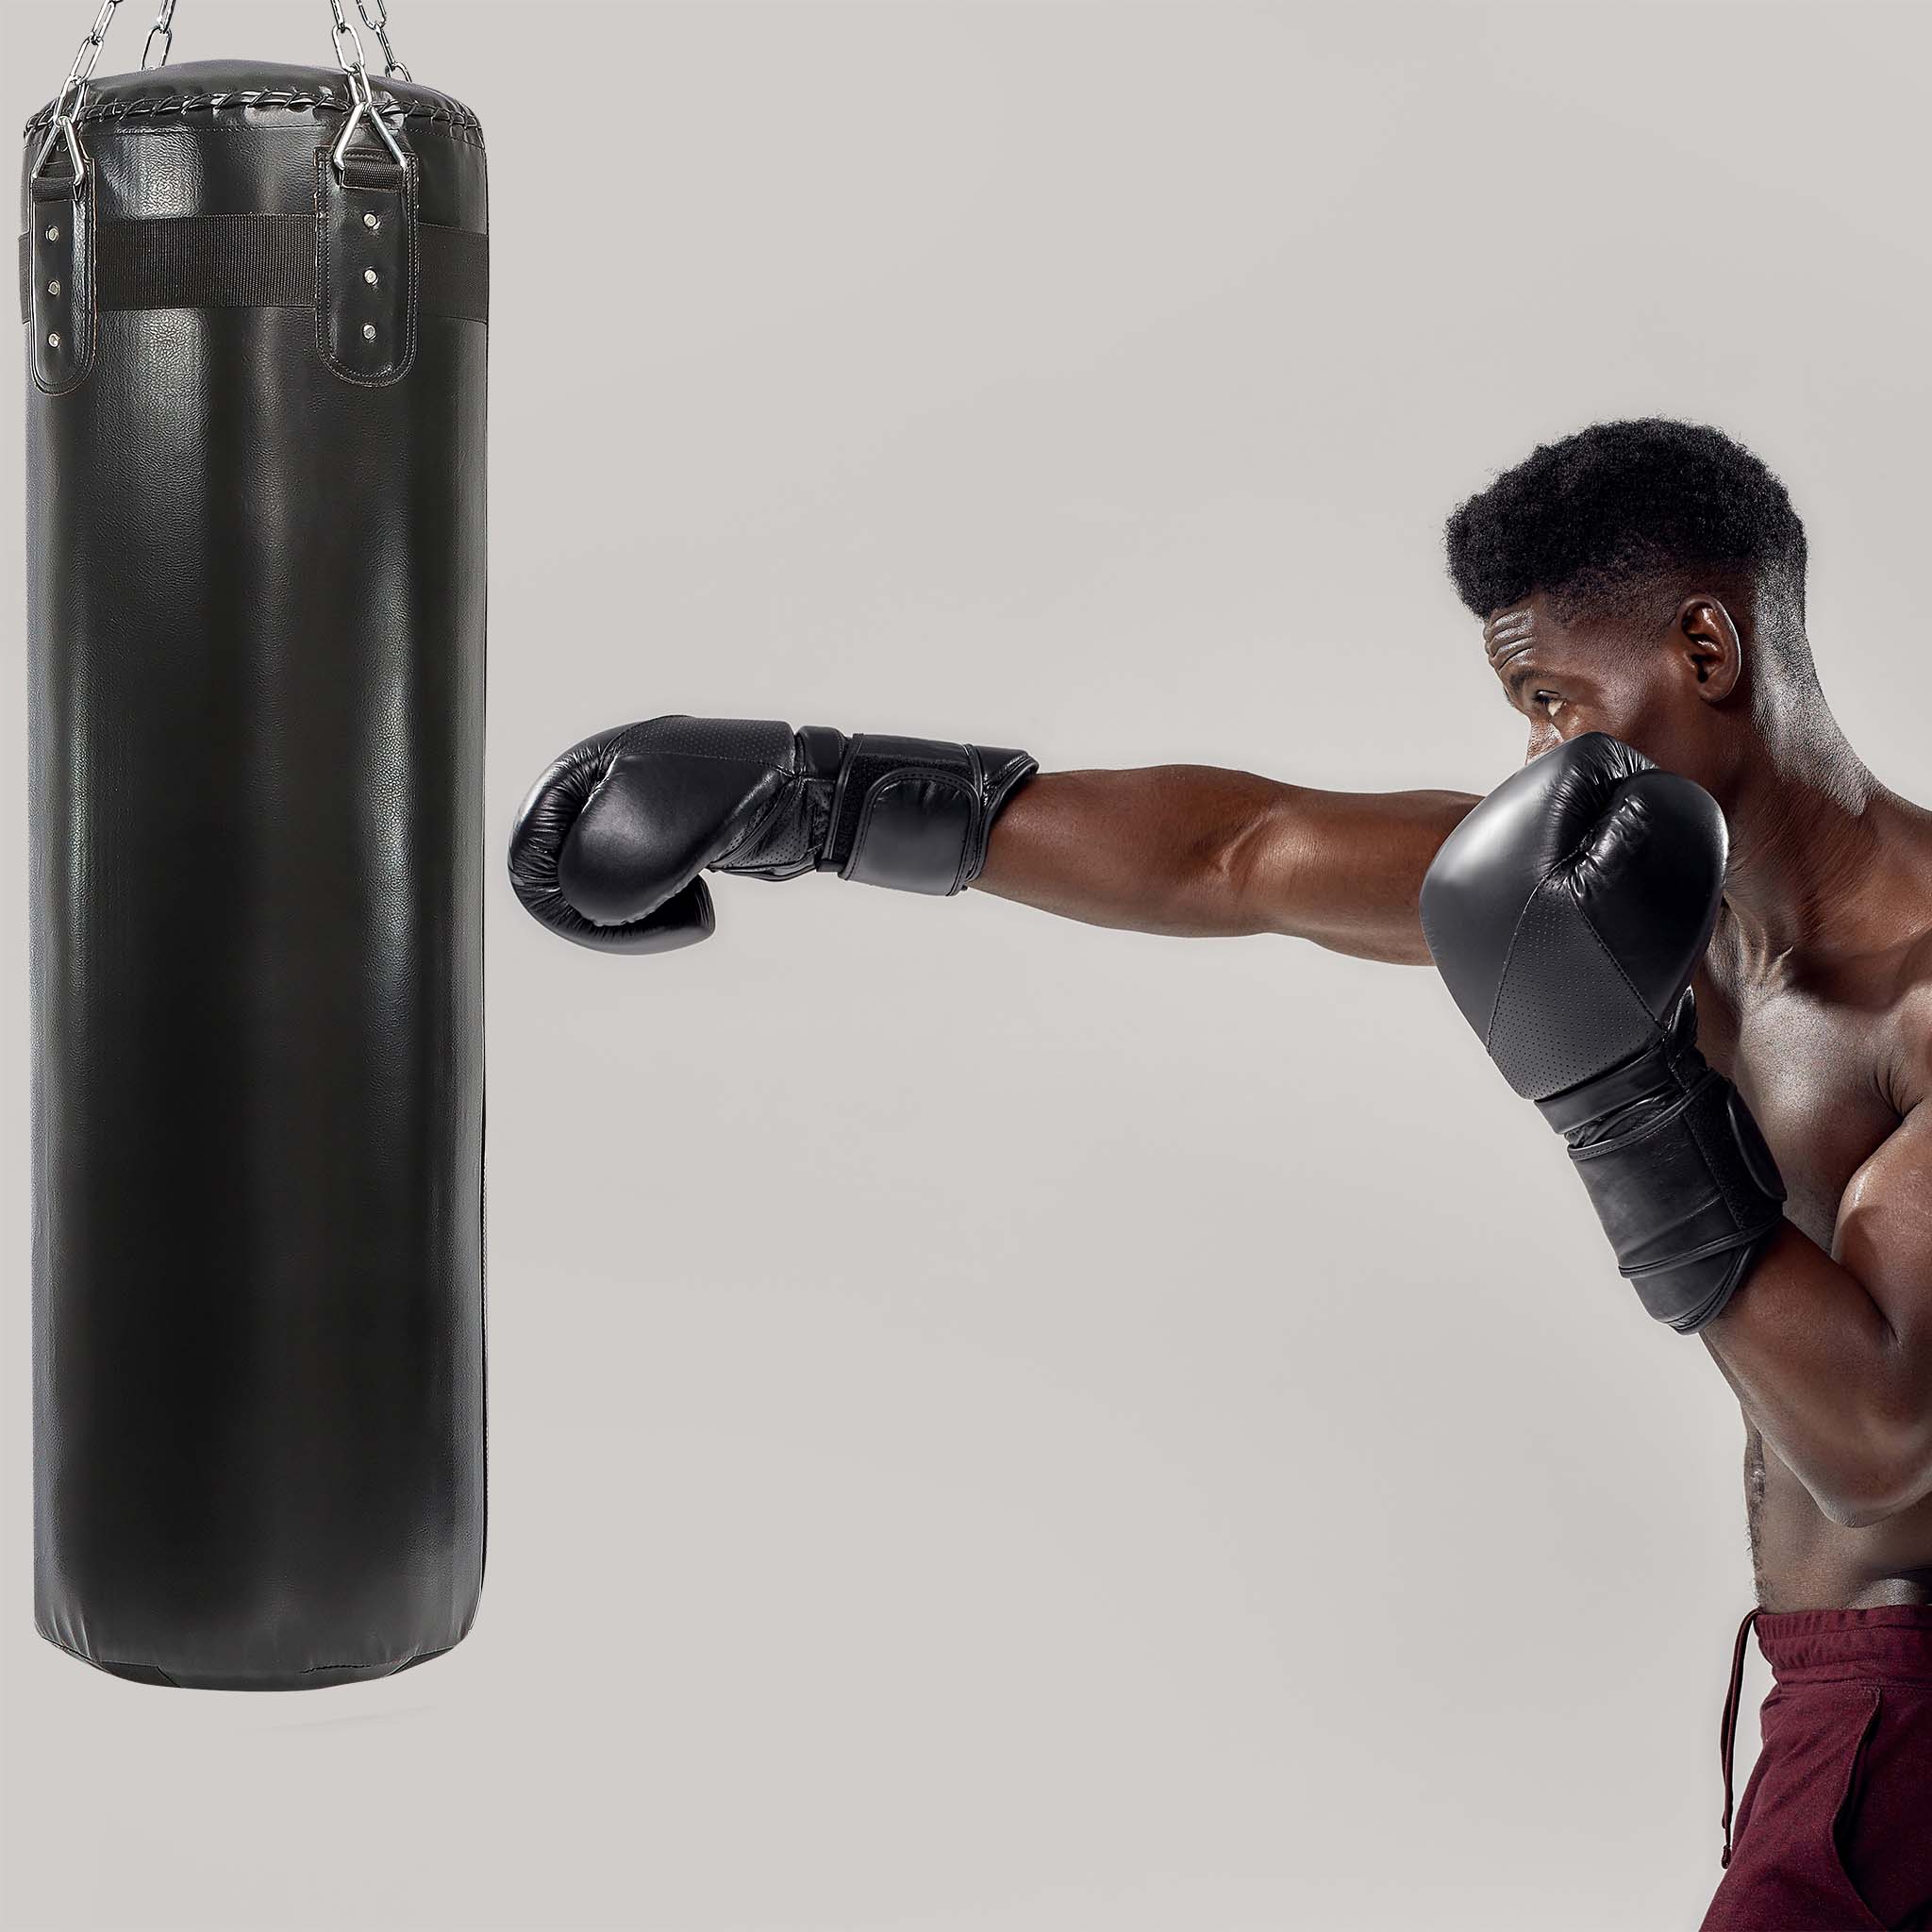 LUXTRI Punching Bag, 120cm 25kg, Sand Filled, 4-Point Chain Suspension